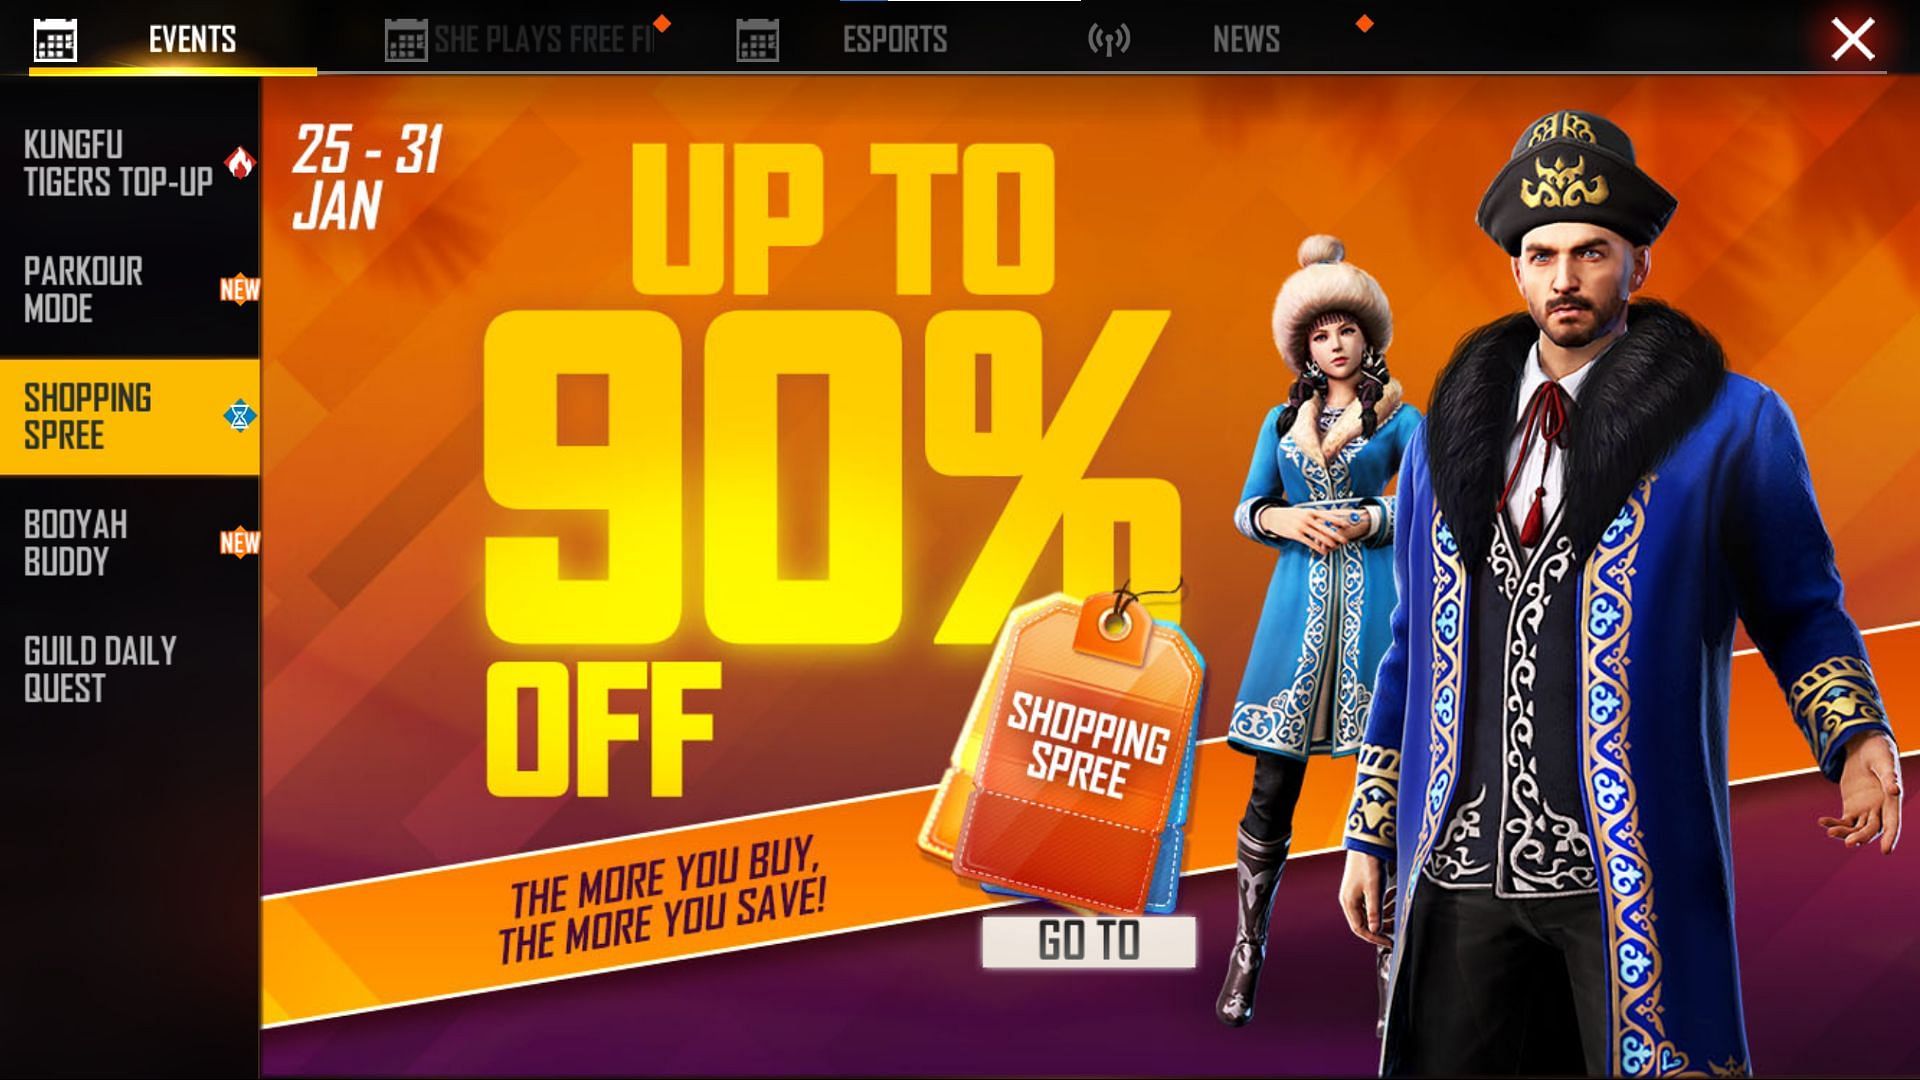 Tap on the &#039;Go To&#039; button to access the Shopping Spree event (Image via Garena)